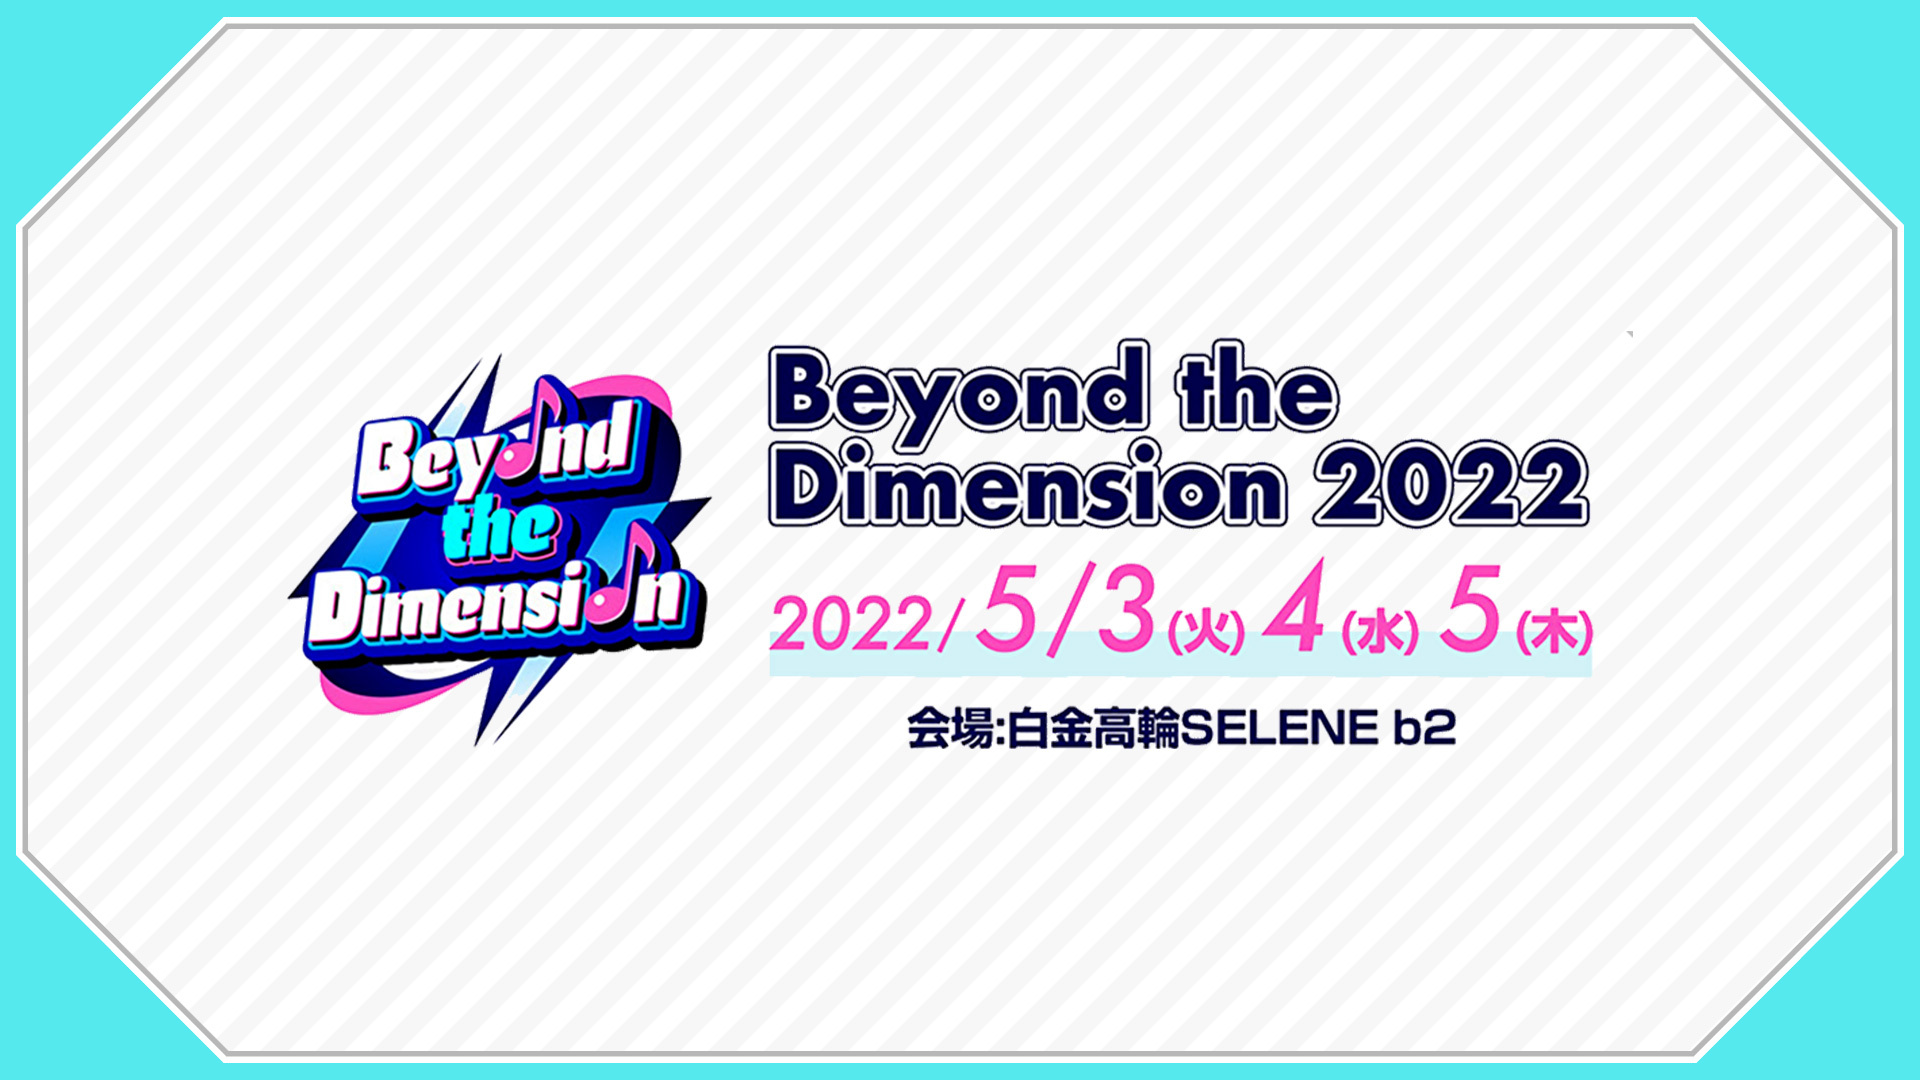 Beyond the Dimension 2022